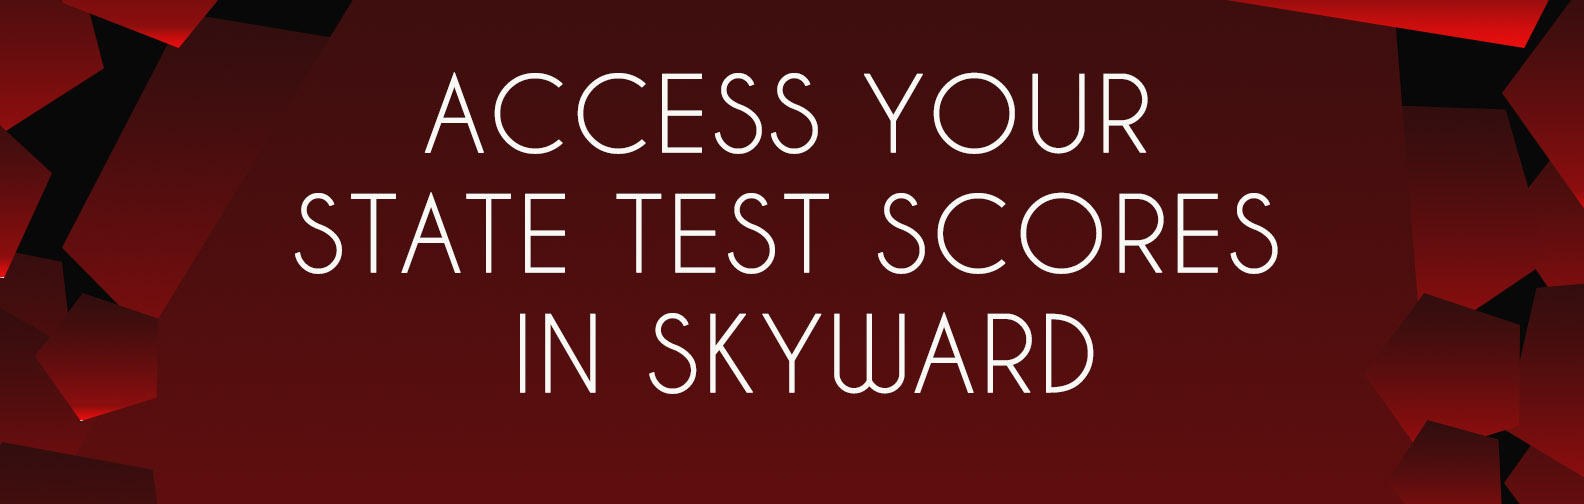 Access your state test scores in Skyward